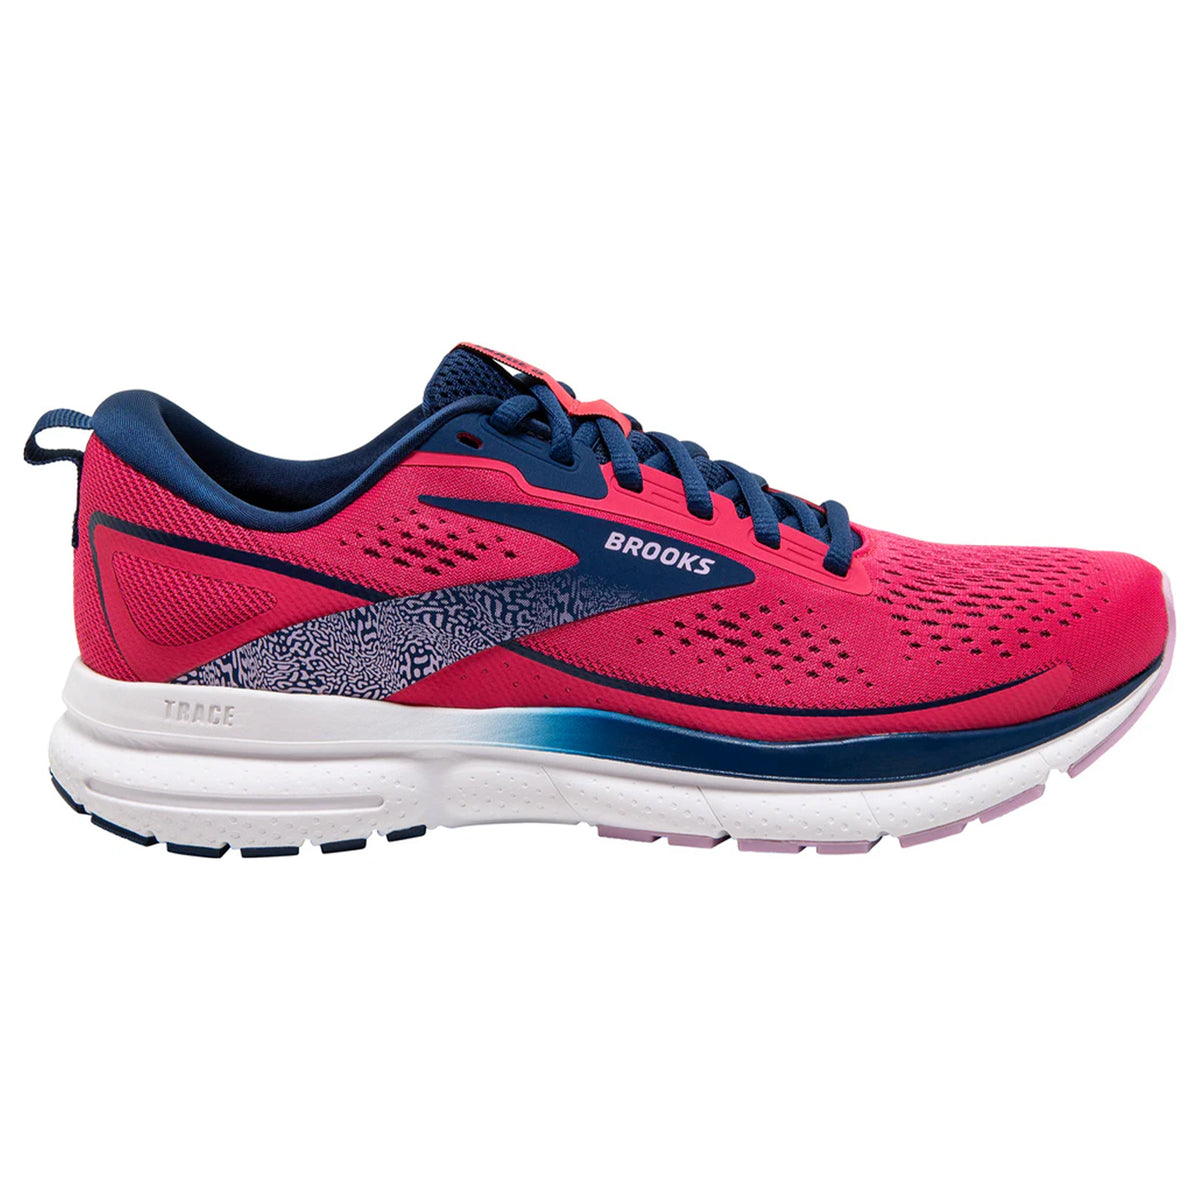 Brooks Trace 3 Womens Running Shoes: Raspberry/Blue/Orchid